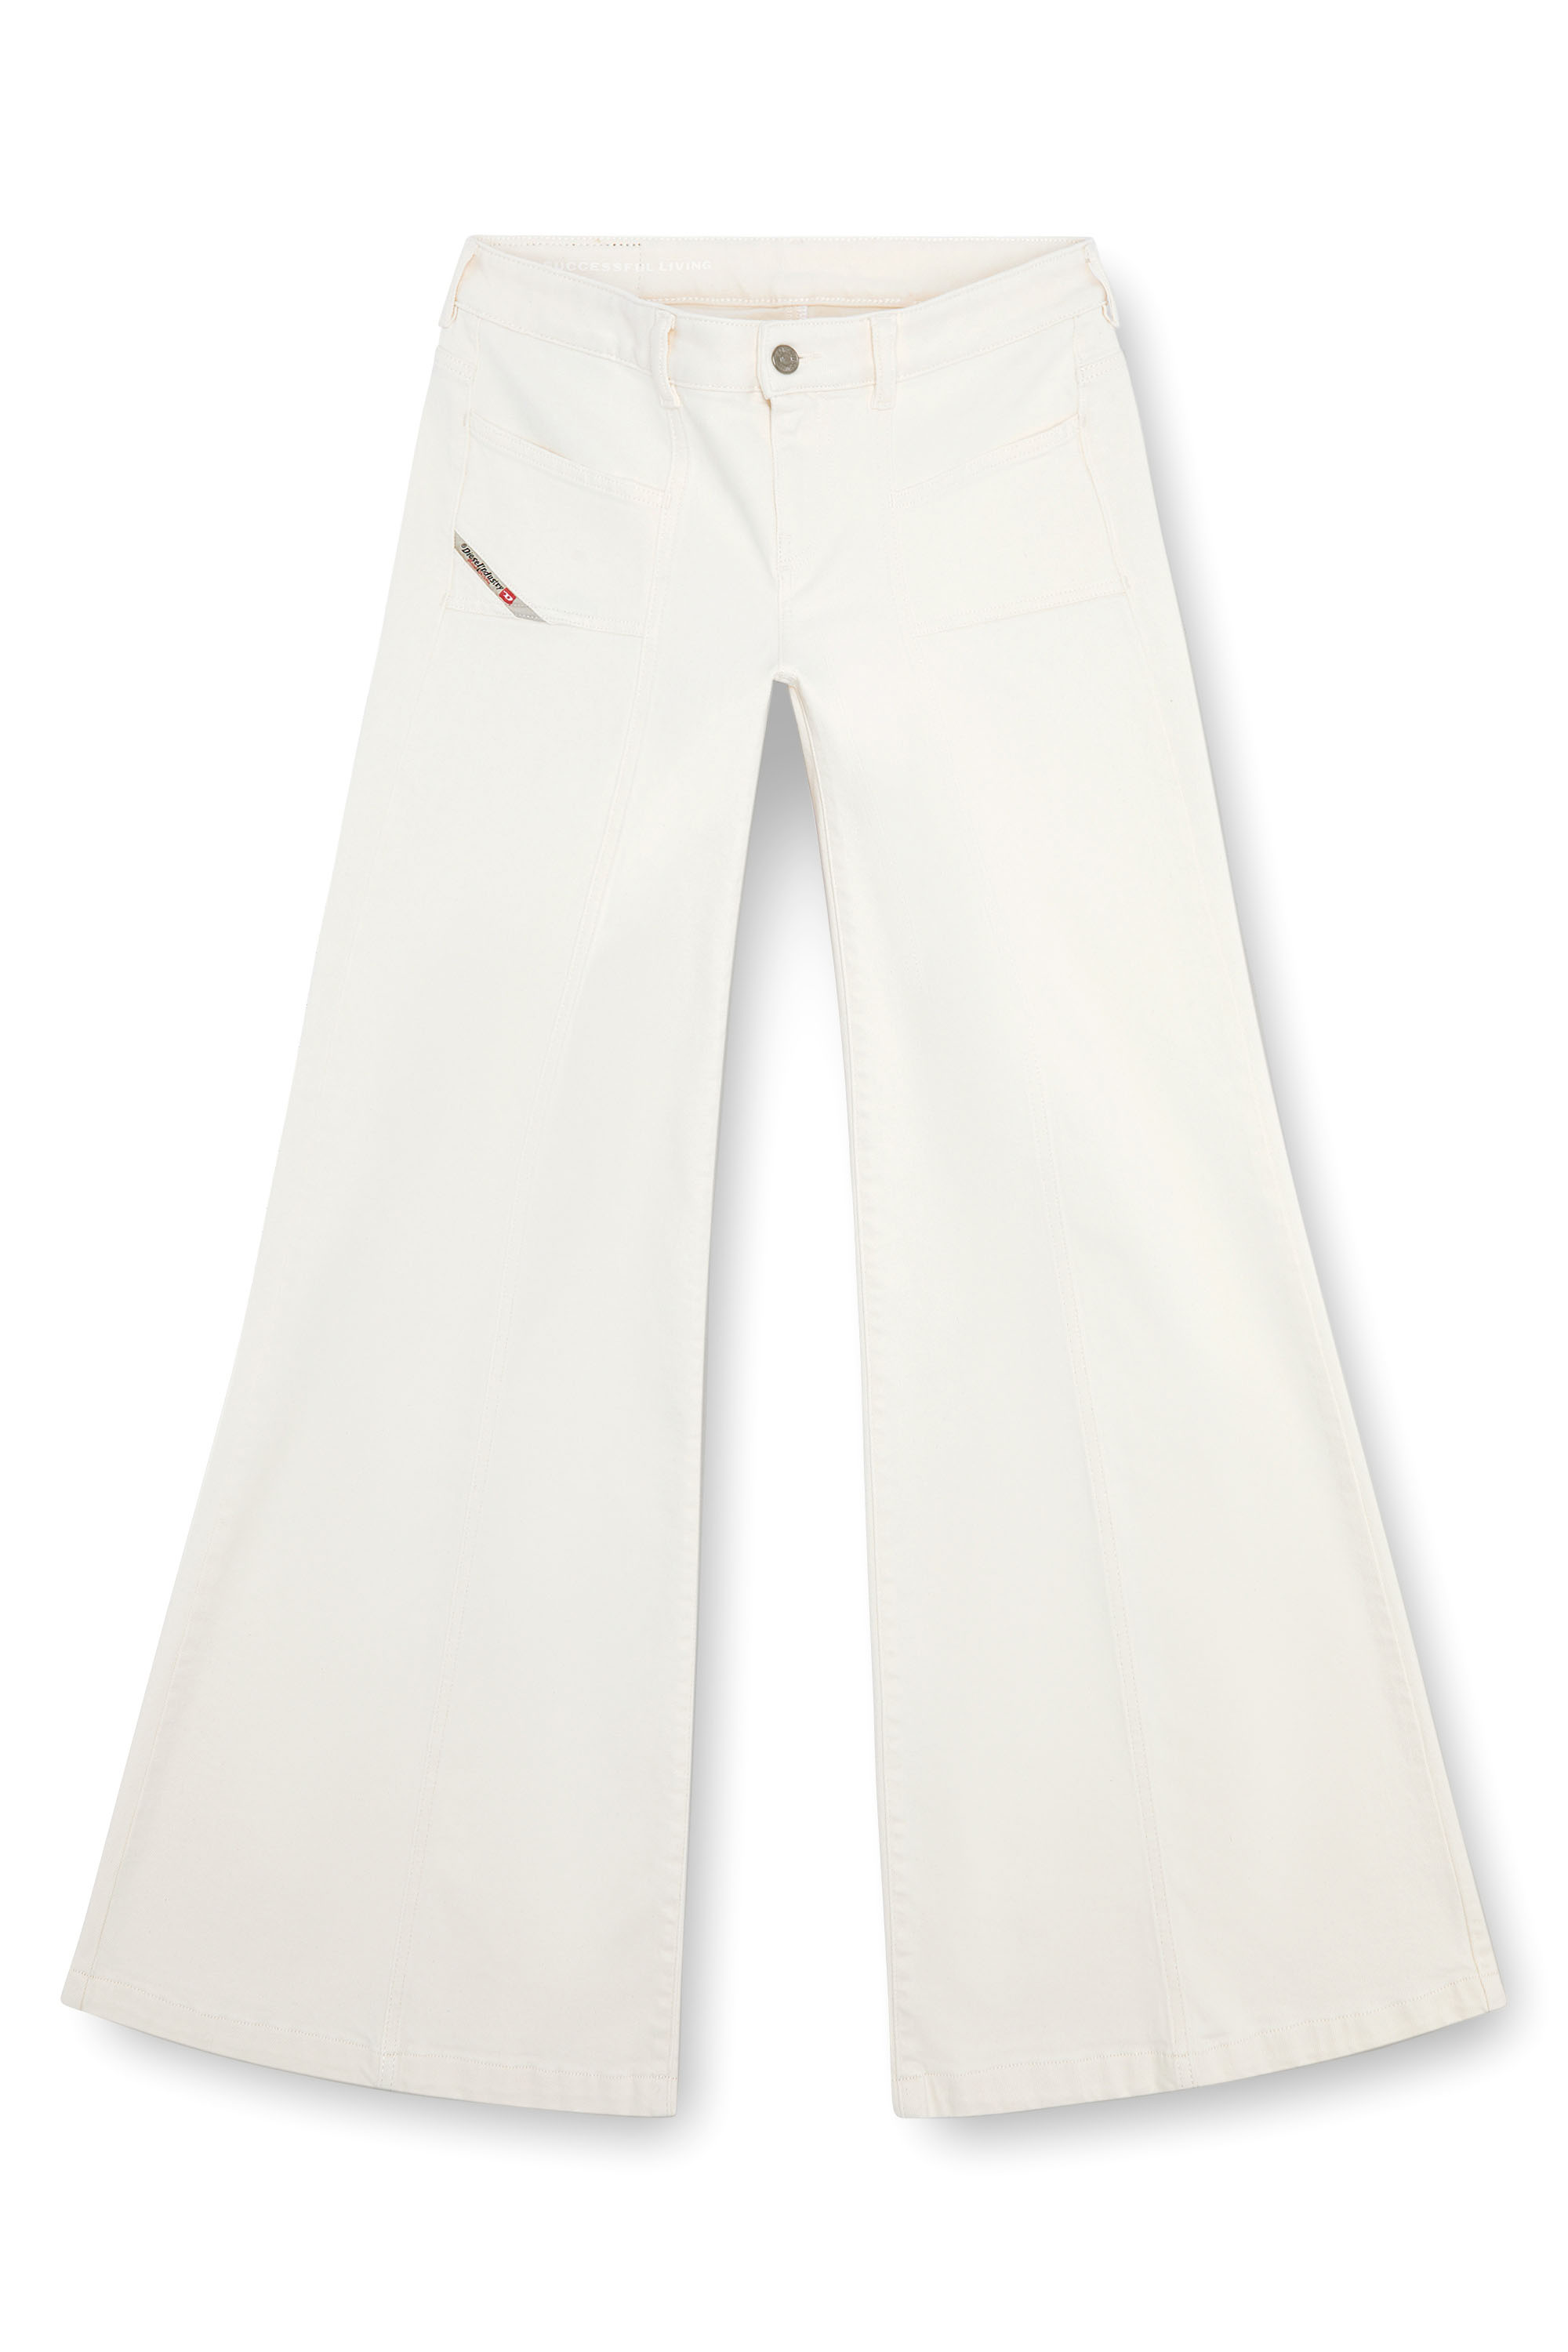 Diesel - Bootcut and Flare Jeans D-Akii 09J68, Mujer Bootcut y Flare Jeans - D-Akii in Blanco - Image 3